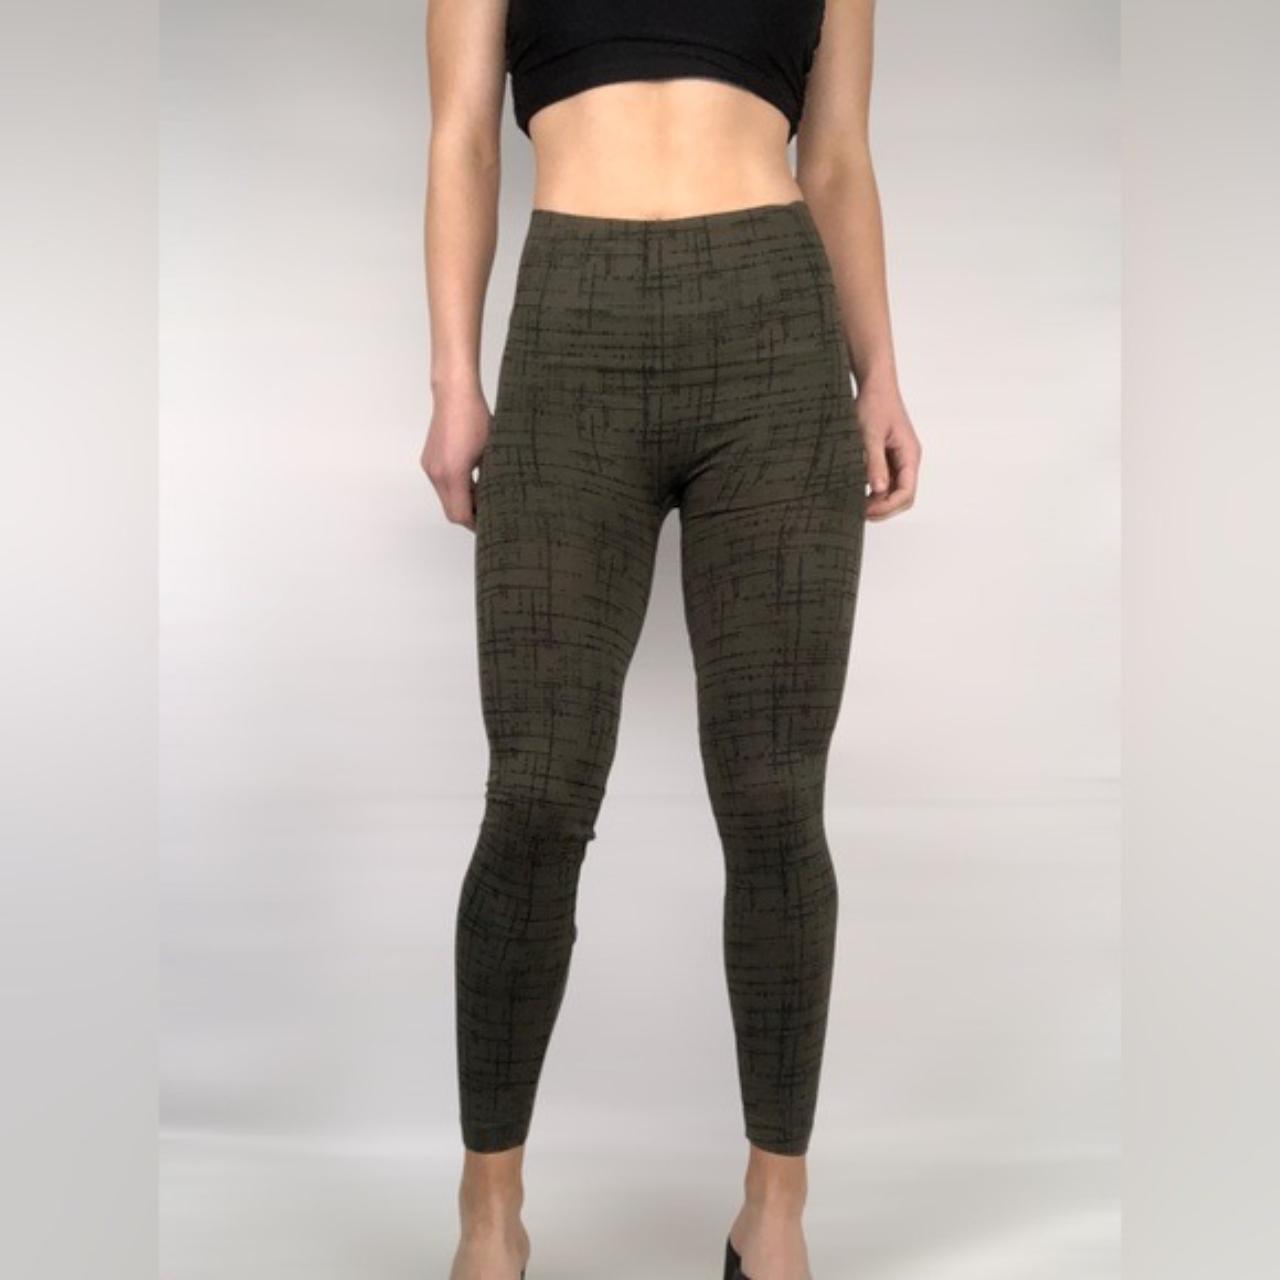 Look at Me Now High-Waisted Seamless Leggings